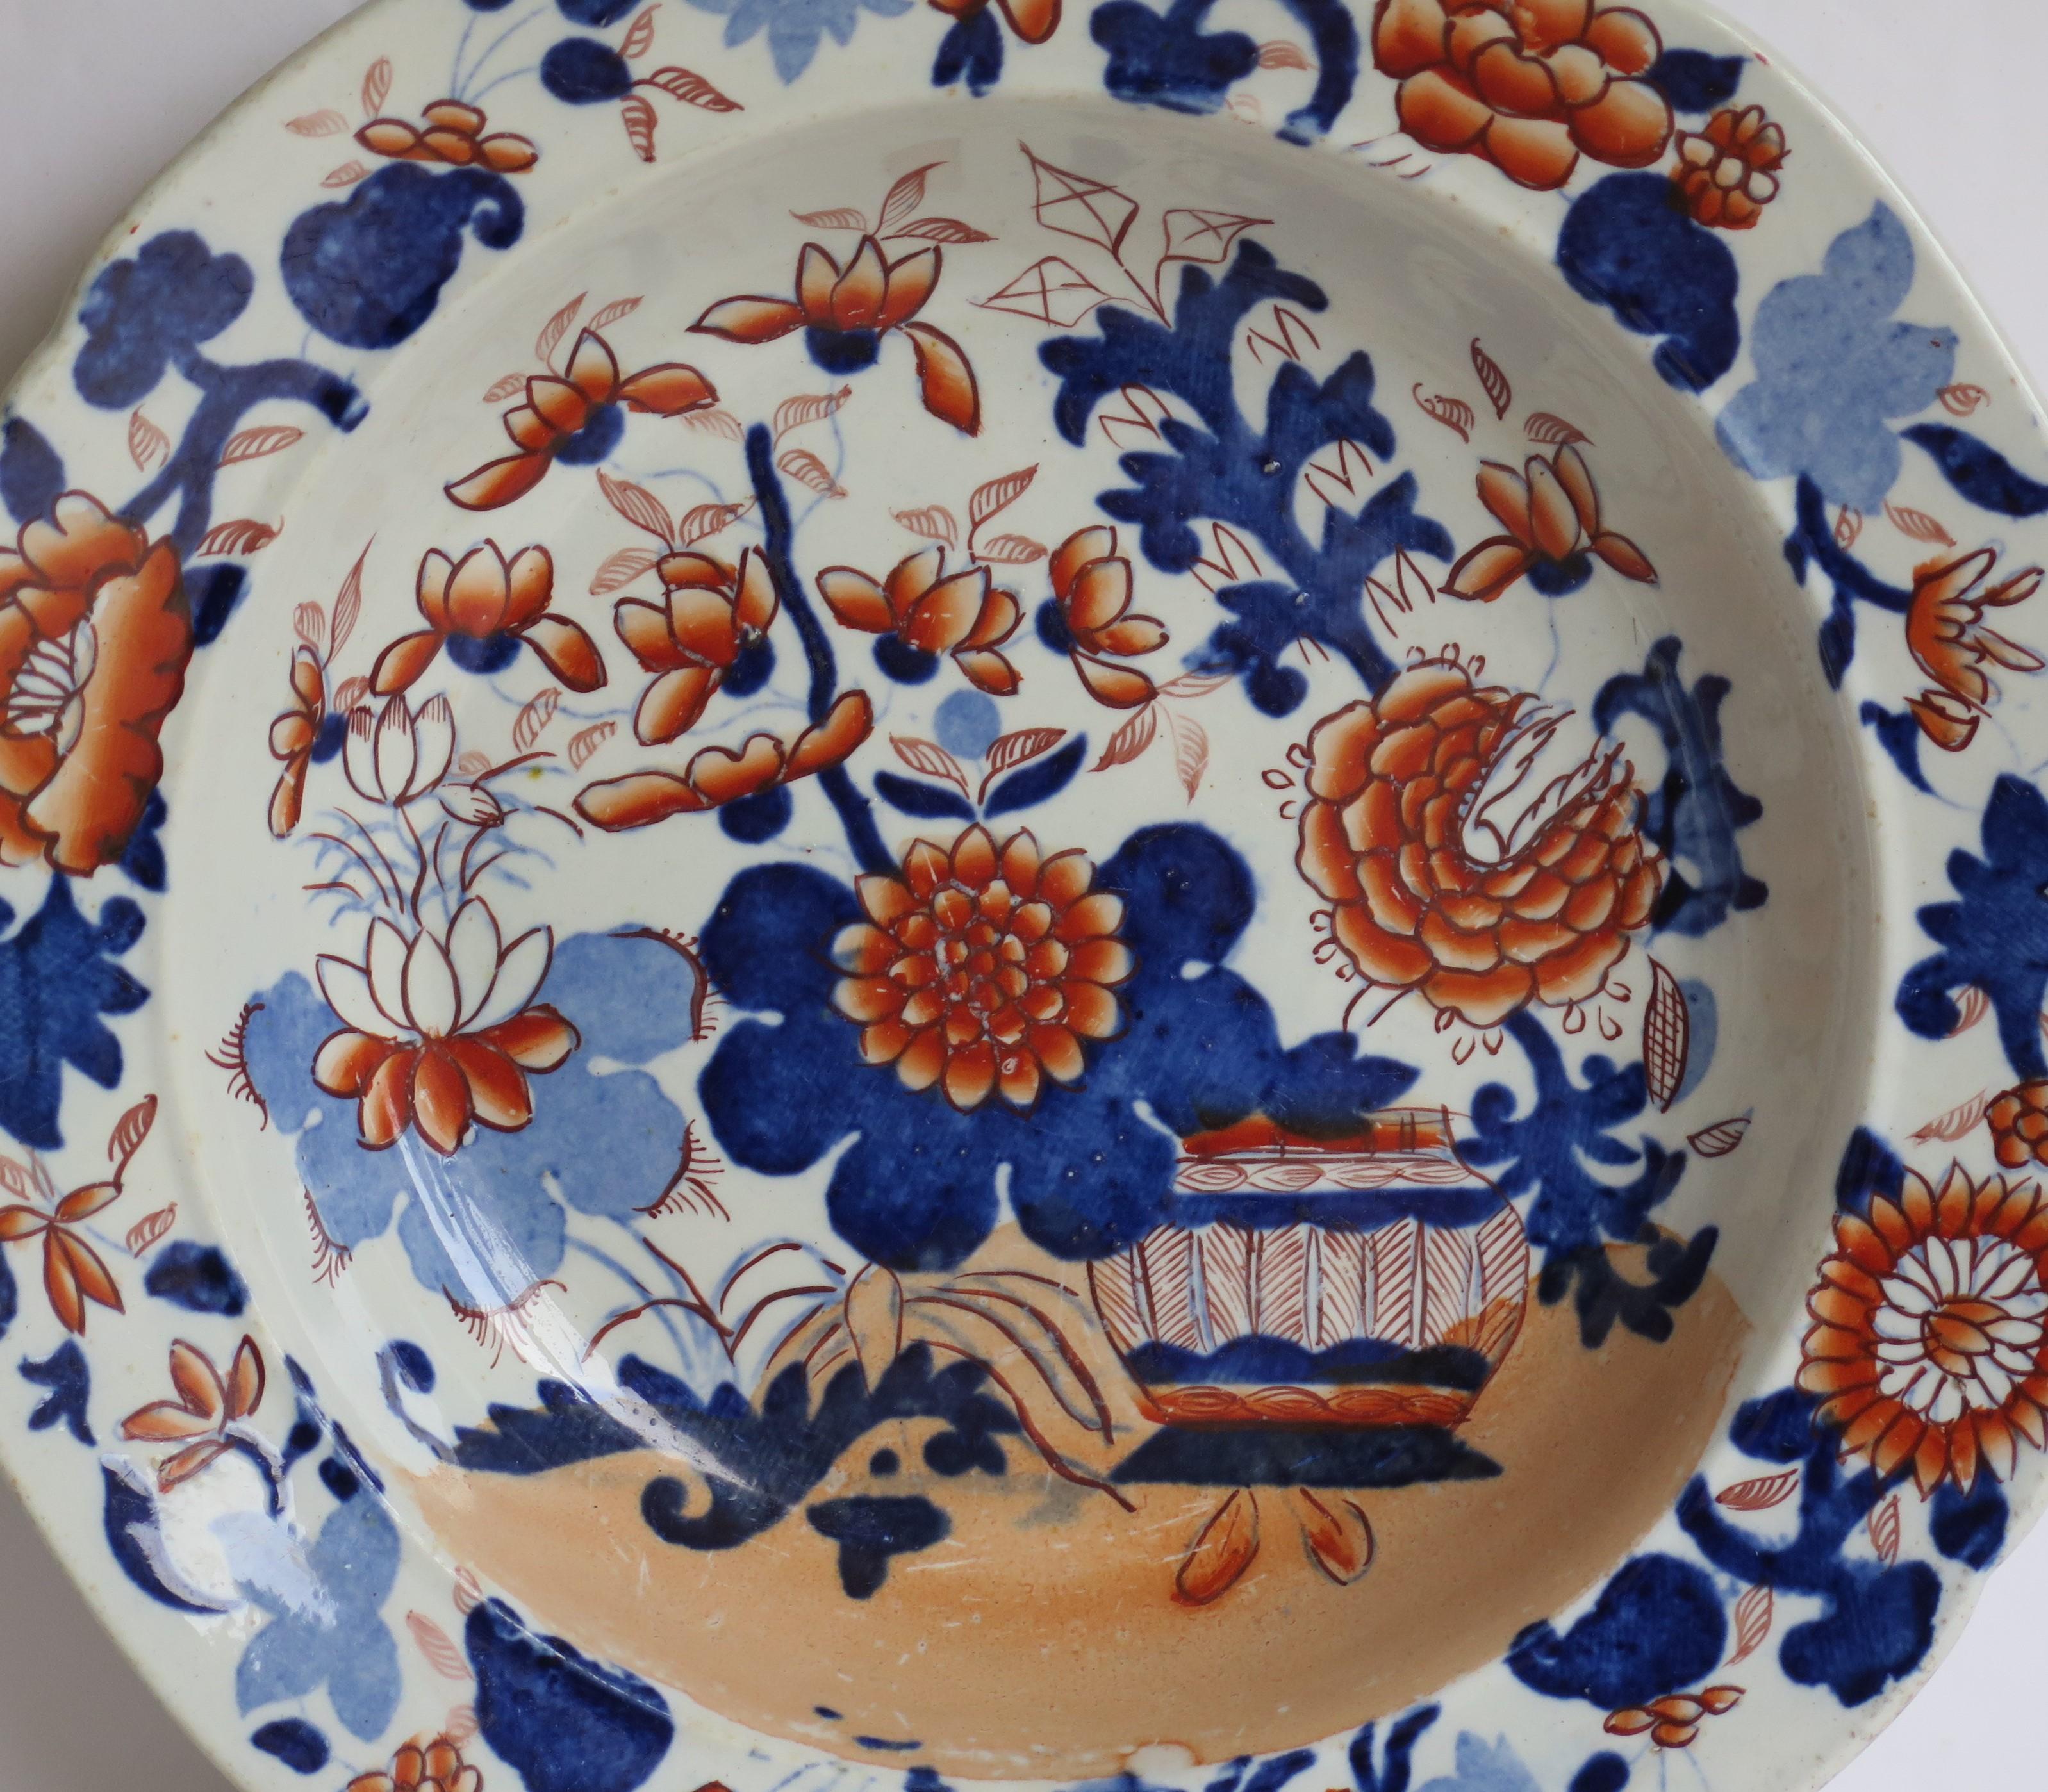 This is a very good early Mason's ironstone pottery soup bowl or deep plate hand painted in the very decorative Basket Japan pattern,  produced by the Mason's factory at Lane Delph, Staffordshire, England, circa 1813-1820.

The plate is circular